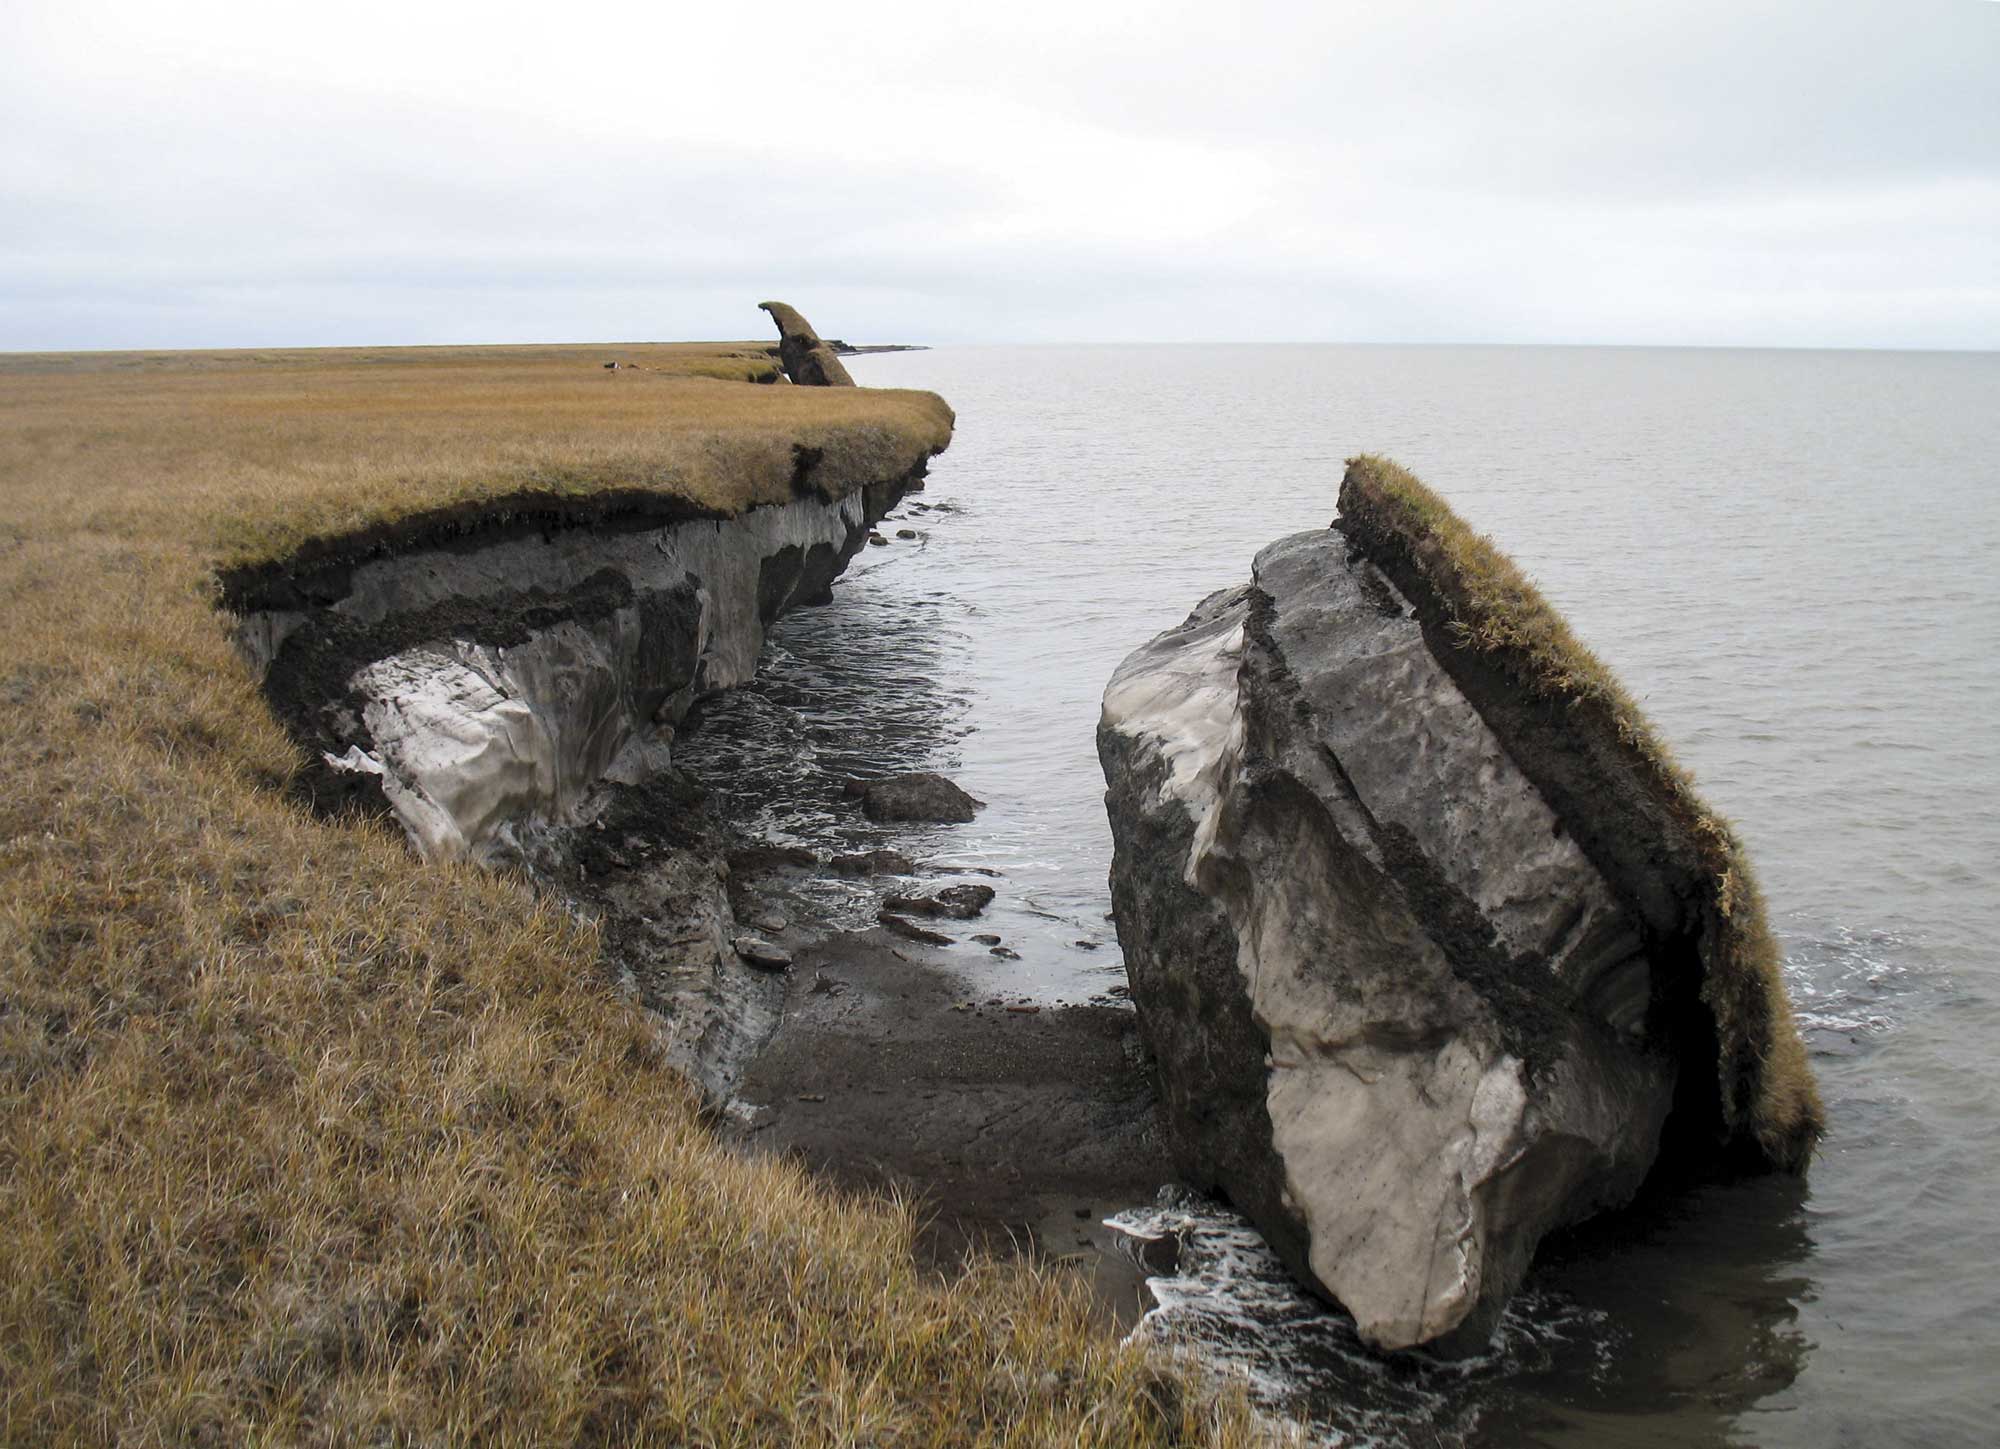 Photograph showing collapsed coastline in Alaska, revealing a layer of frozen permafrost with a darker active layer above, topped by grass.